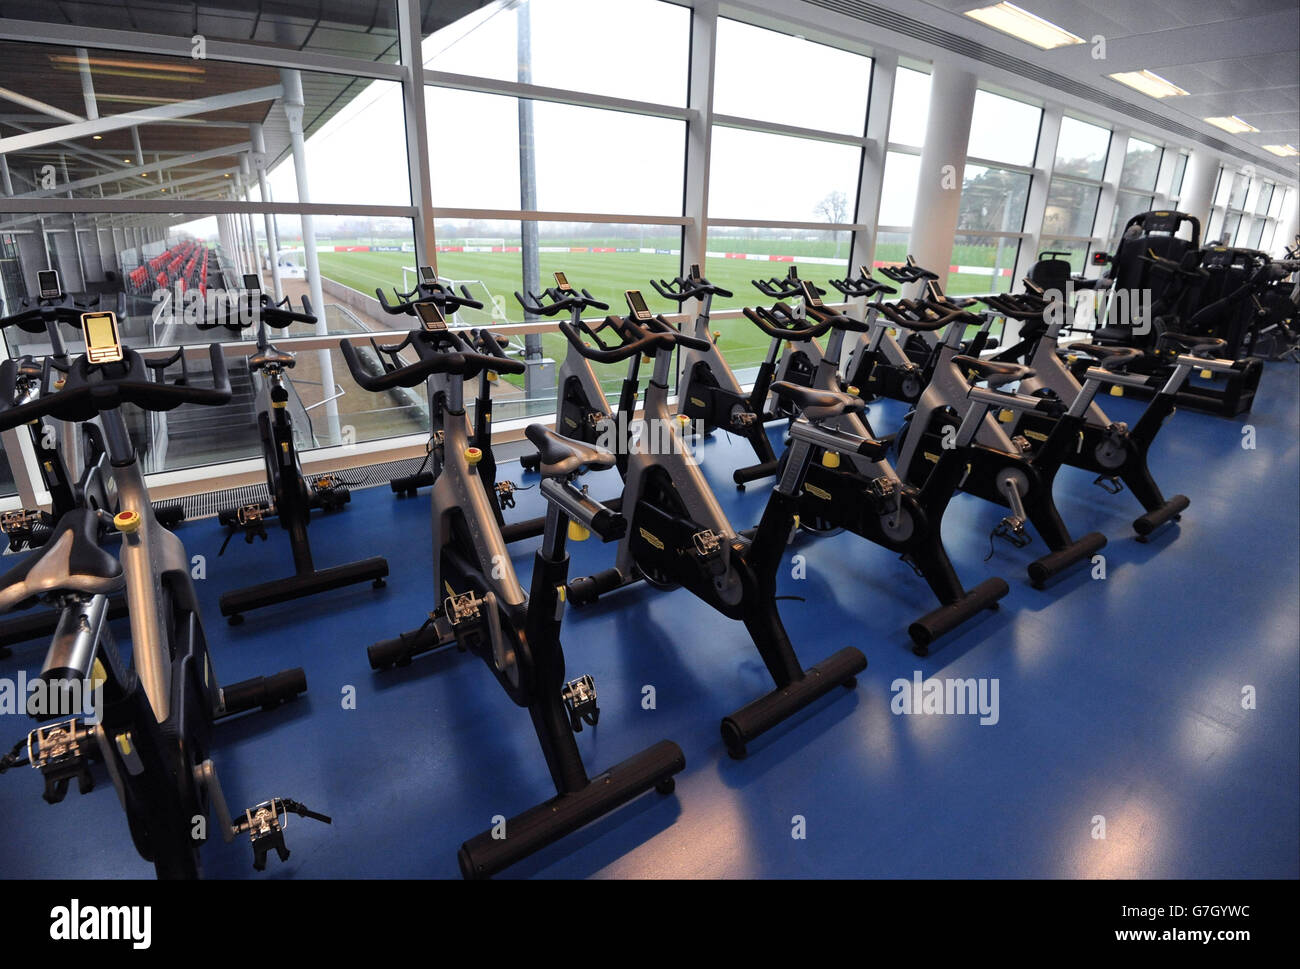 A general view of running machines in the gym used by the England football team to train, at St. George's Park, Burton-upon-Trent. Stock Photo